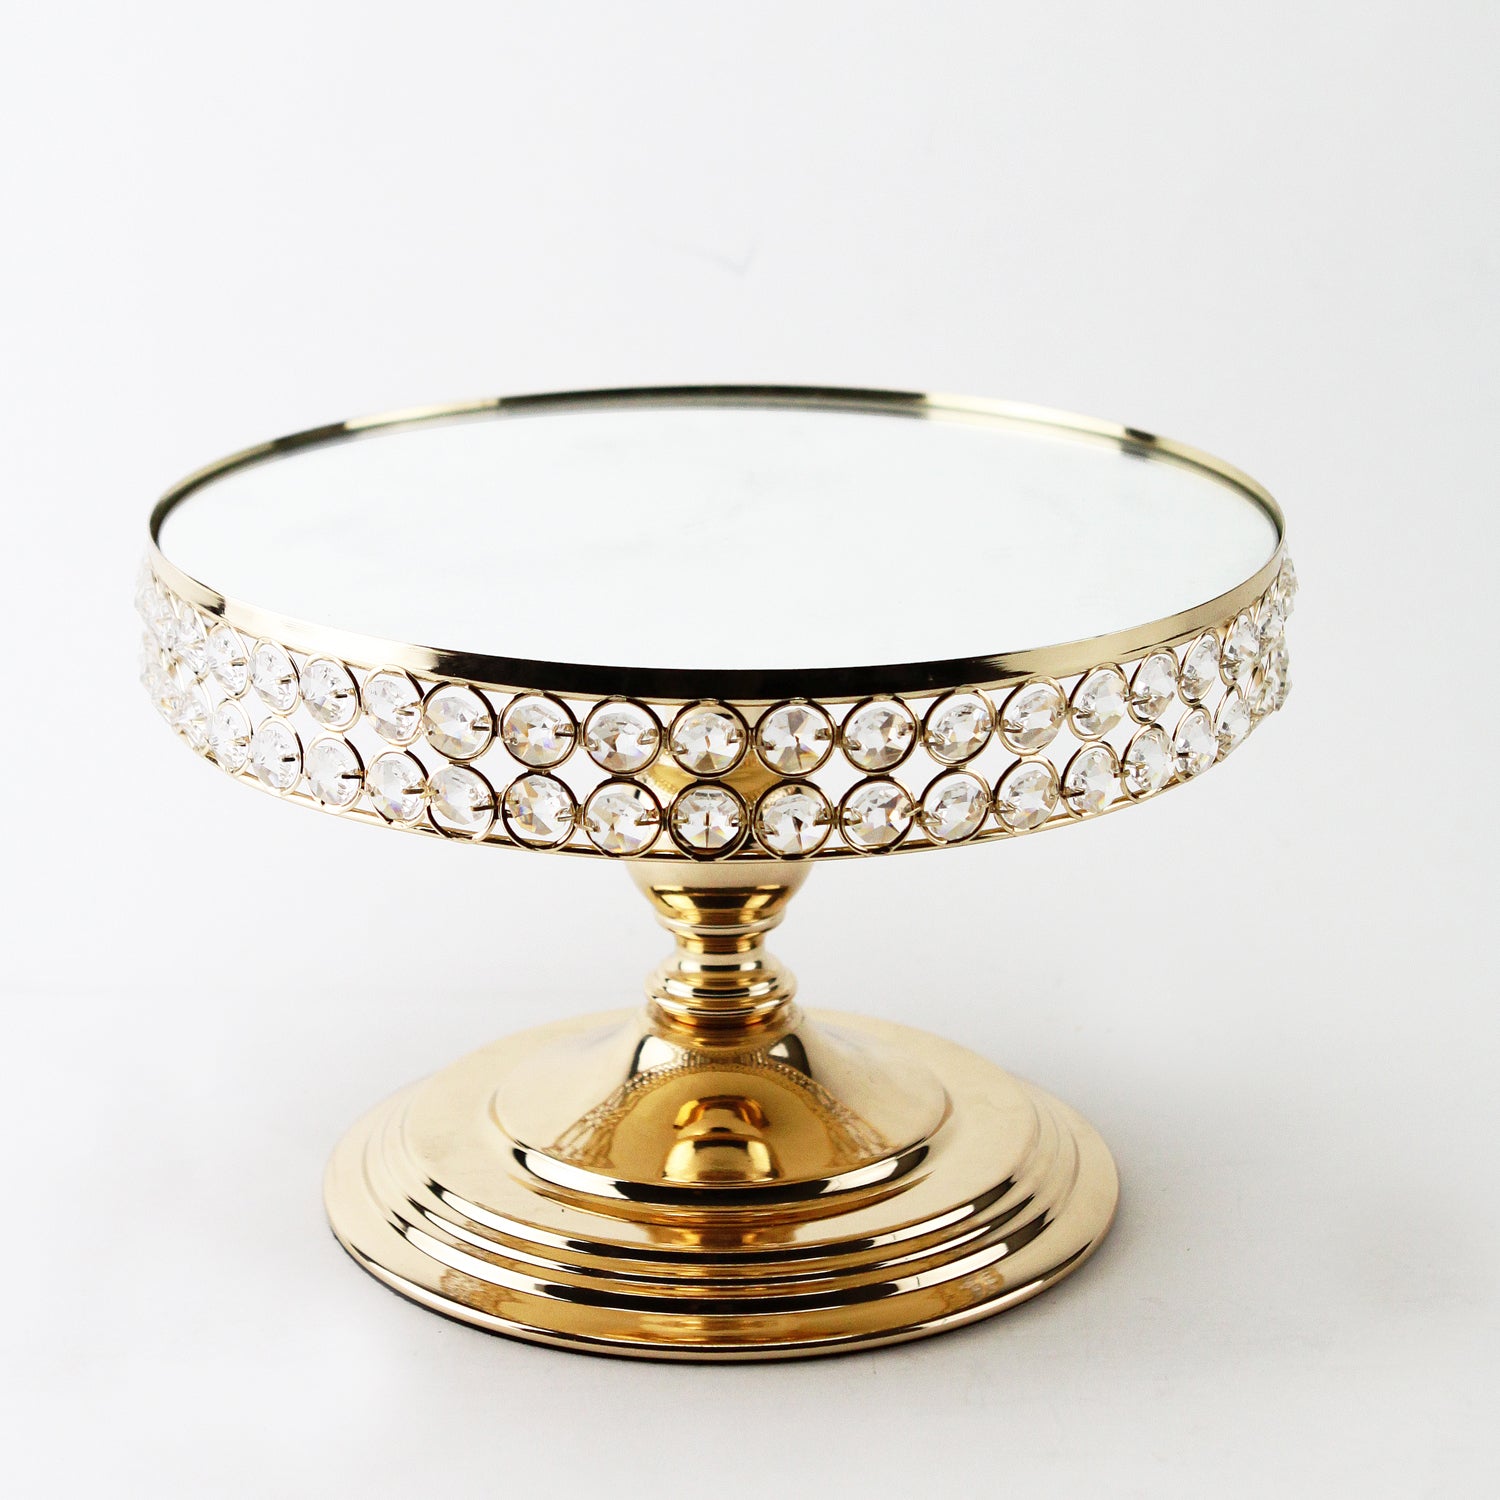 Crystal Cake Stand Serving Tray